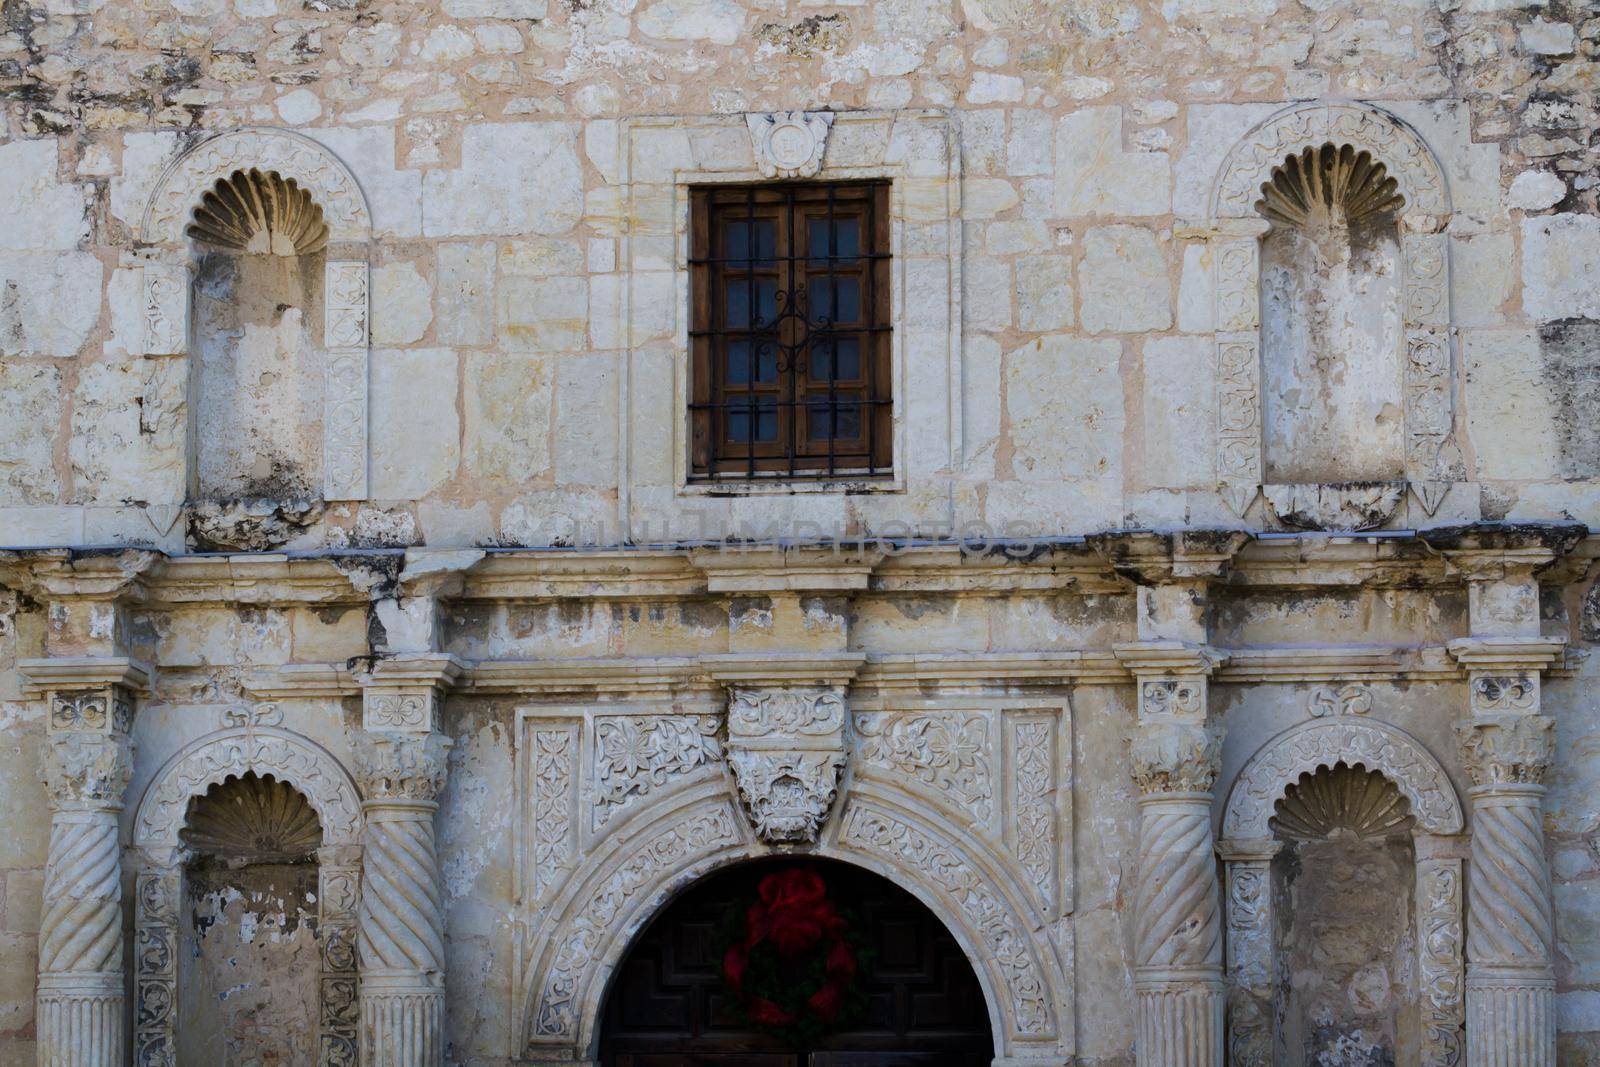 The Alamo mission in San Antonio Missions National park , Texas